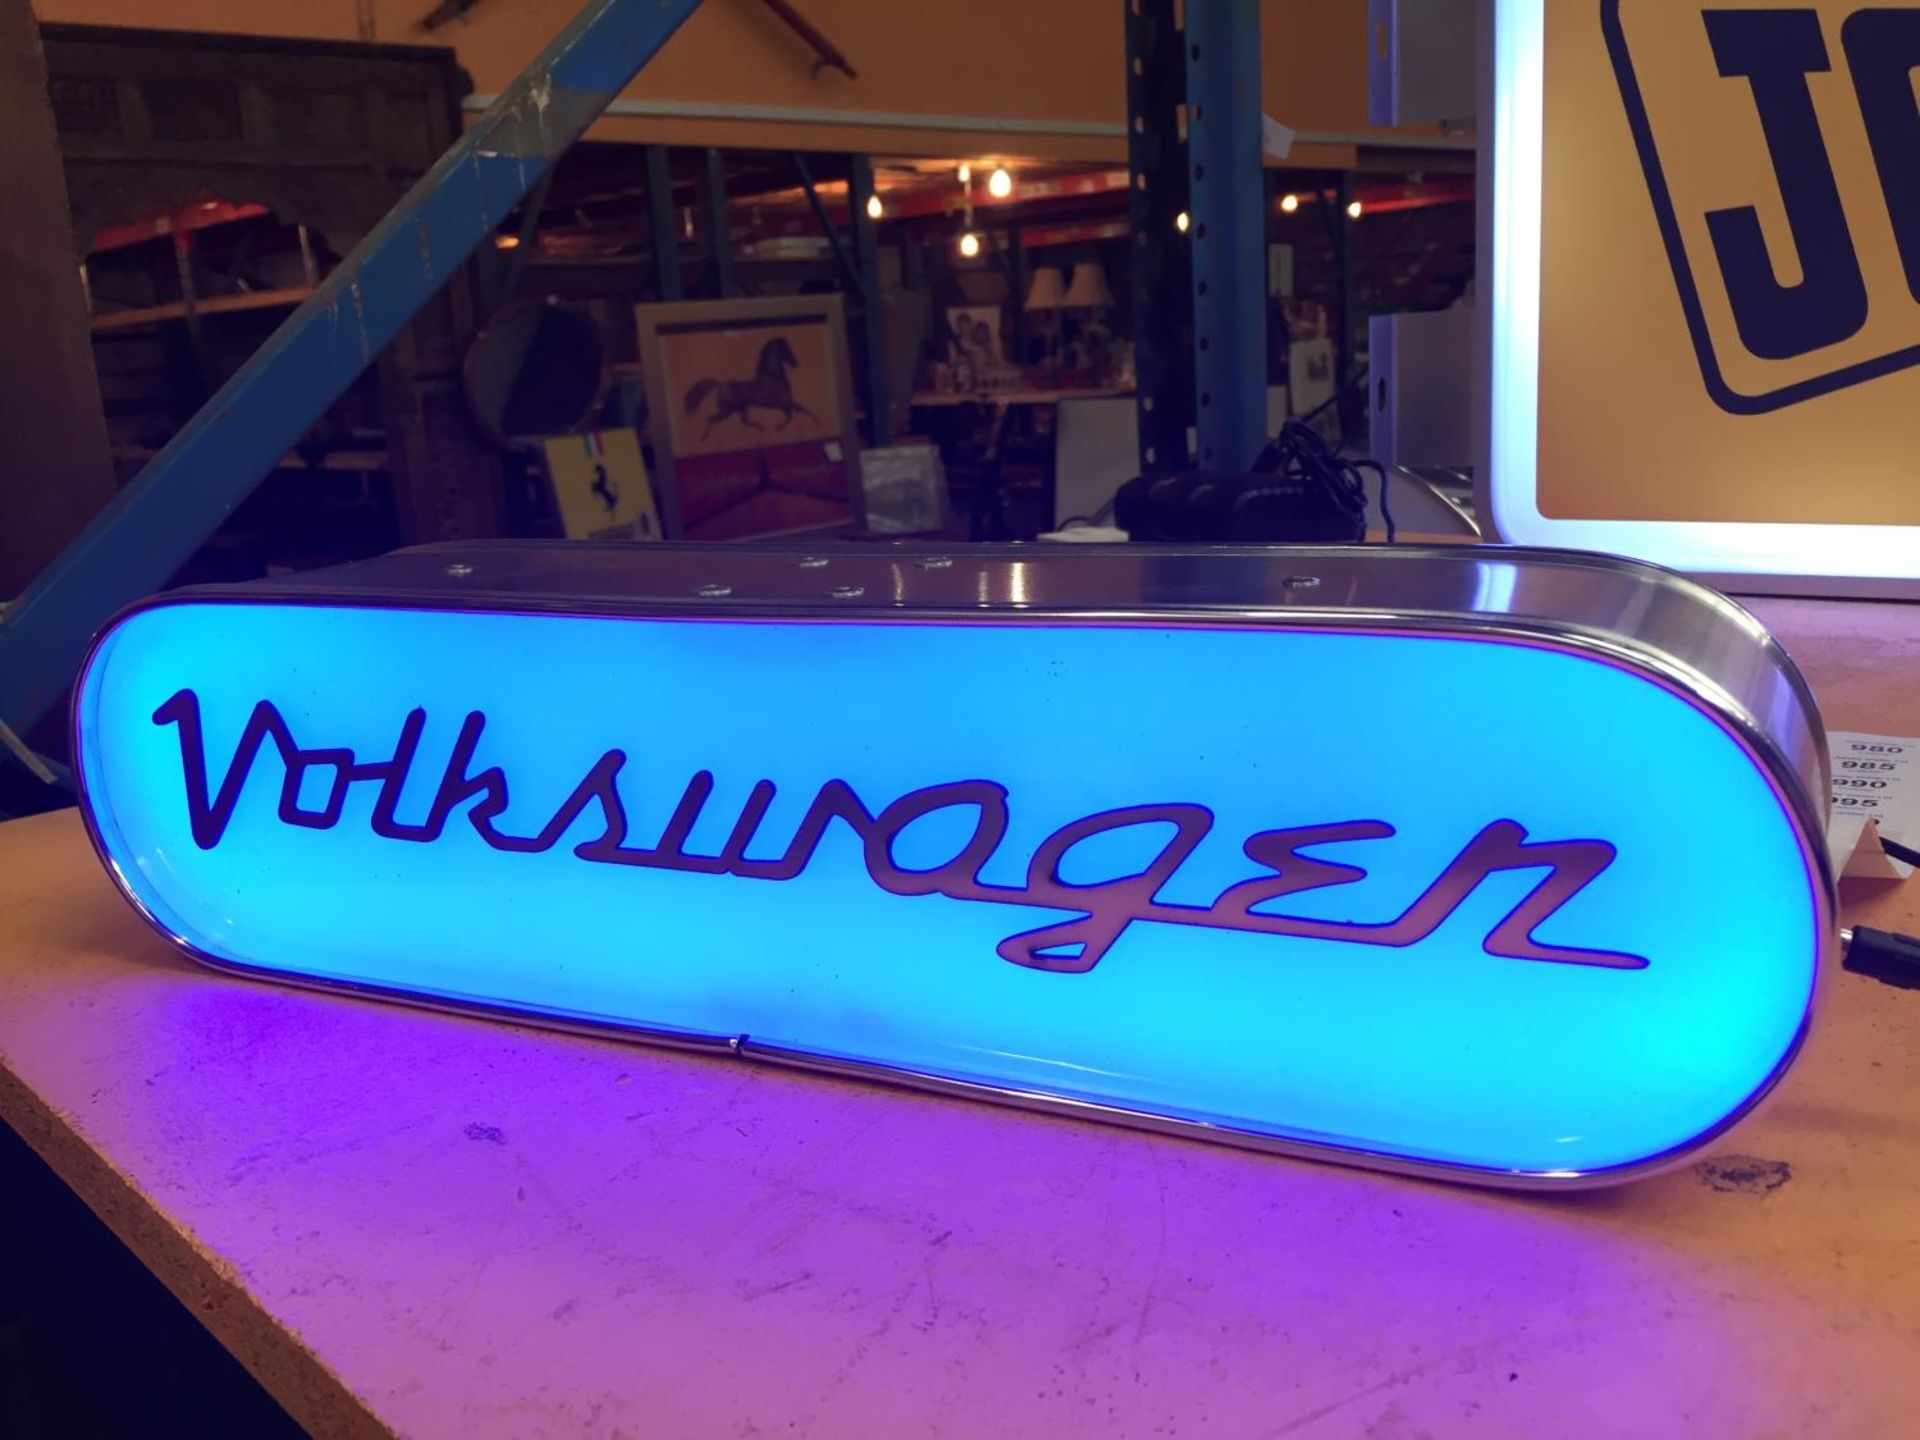 A VOLKSWAGON LIGHT UP SIGN